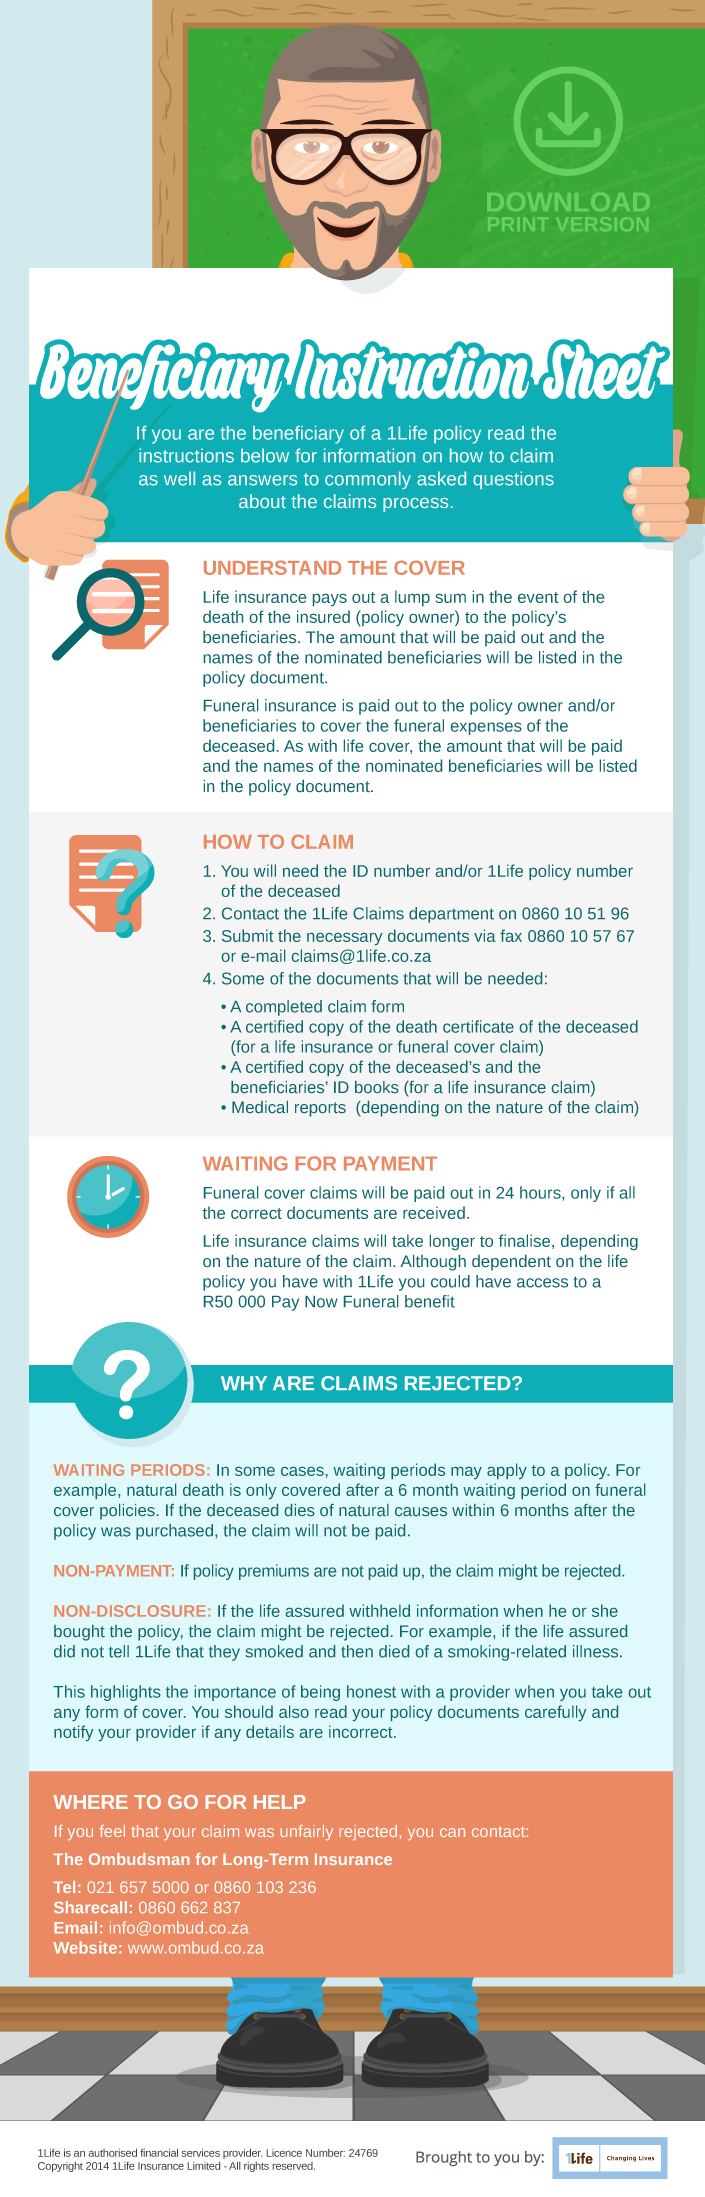 Beneficiary Instruction sheet infographic